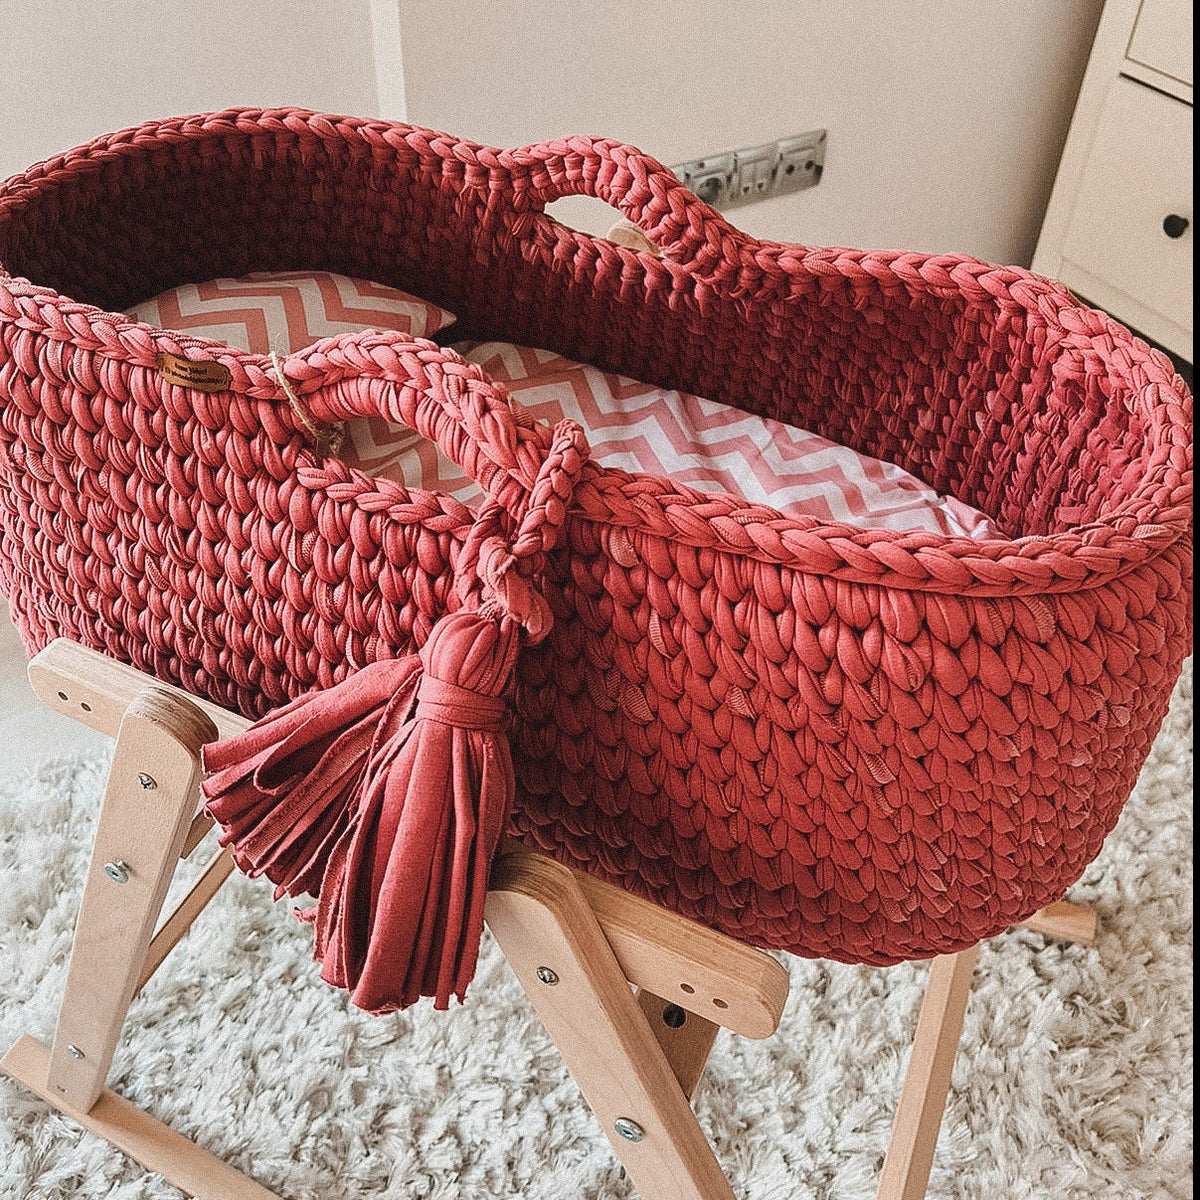 Angel Hand-Knitted Baby Bassinet - Cherry